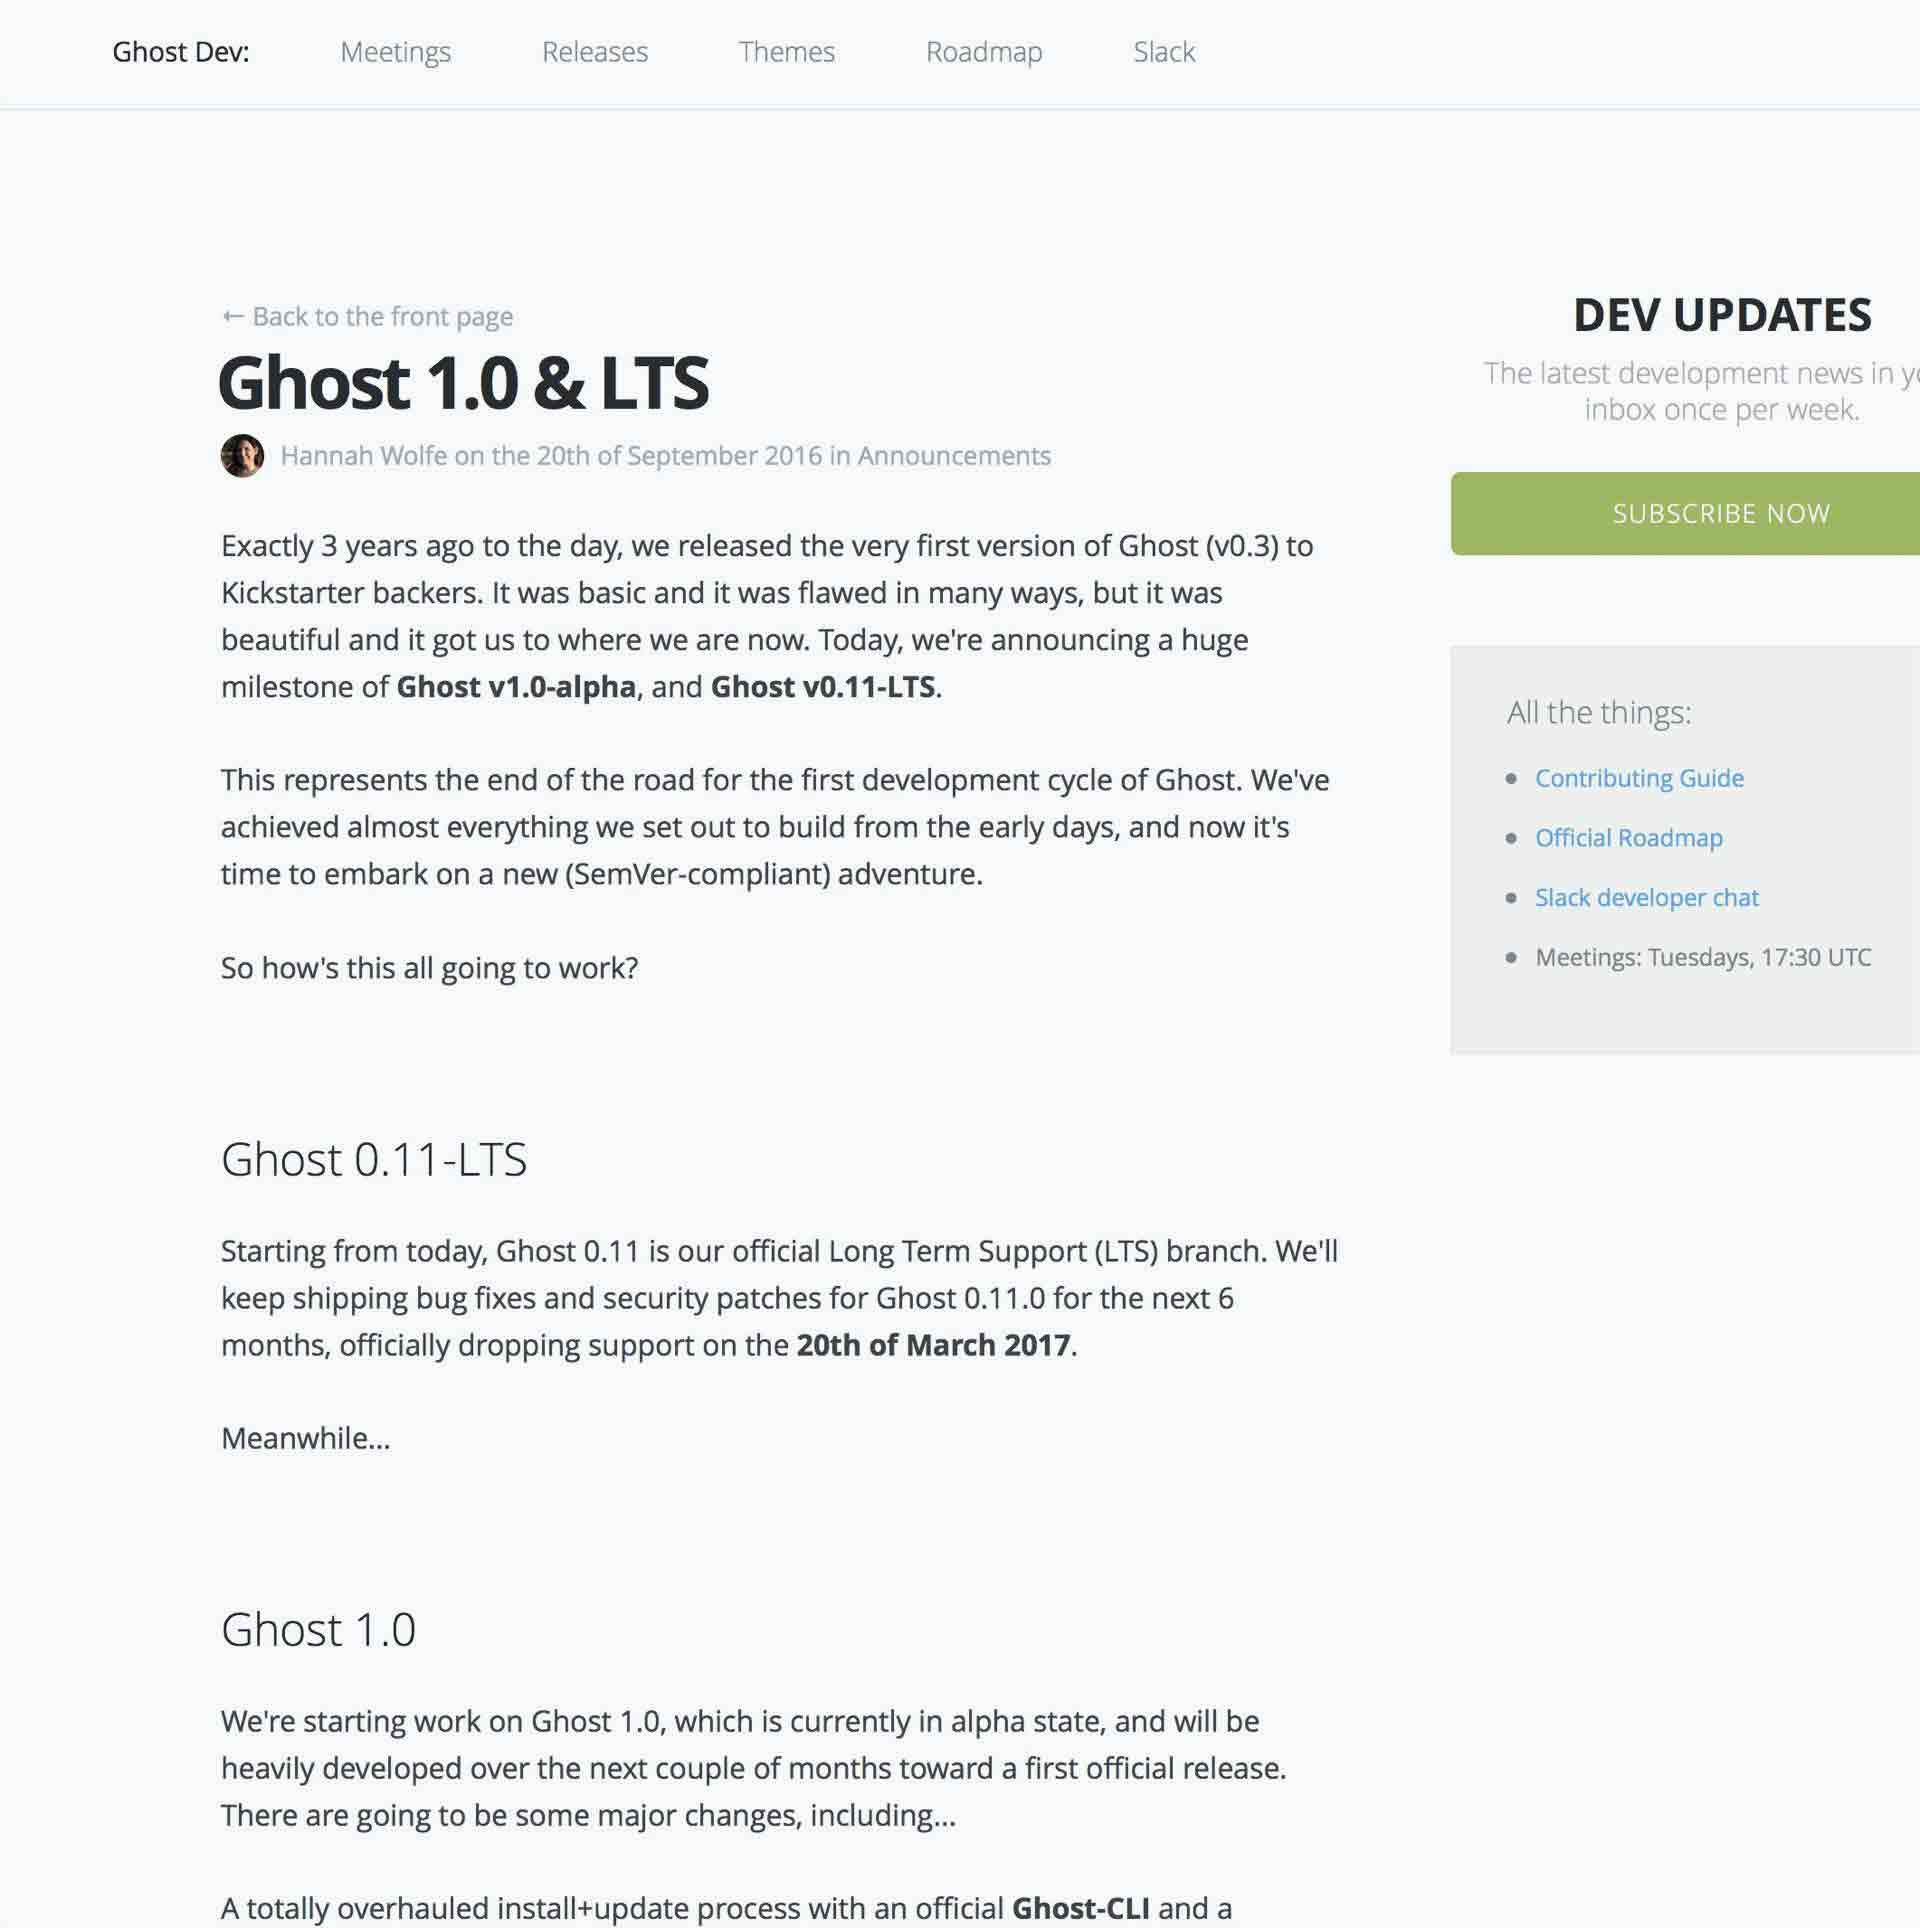 Ghost0.11 LSTそしてGhost1.0へ